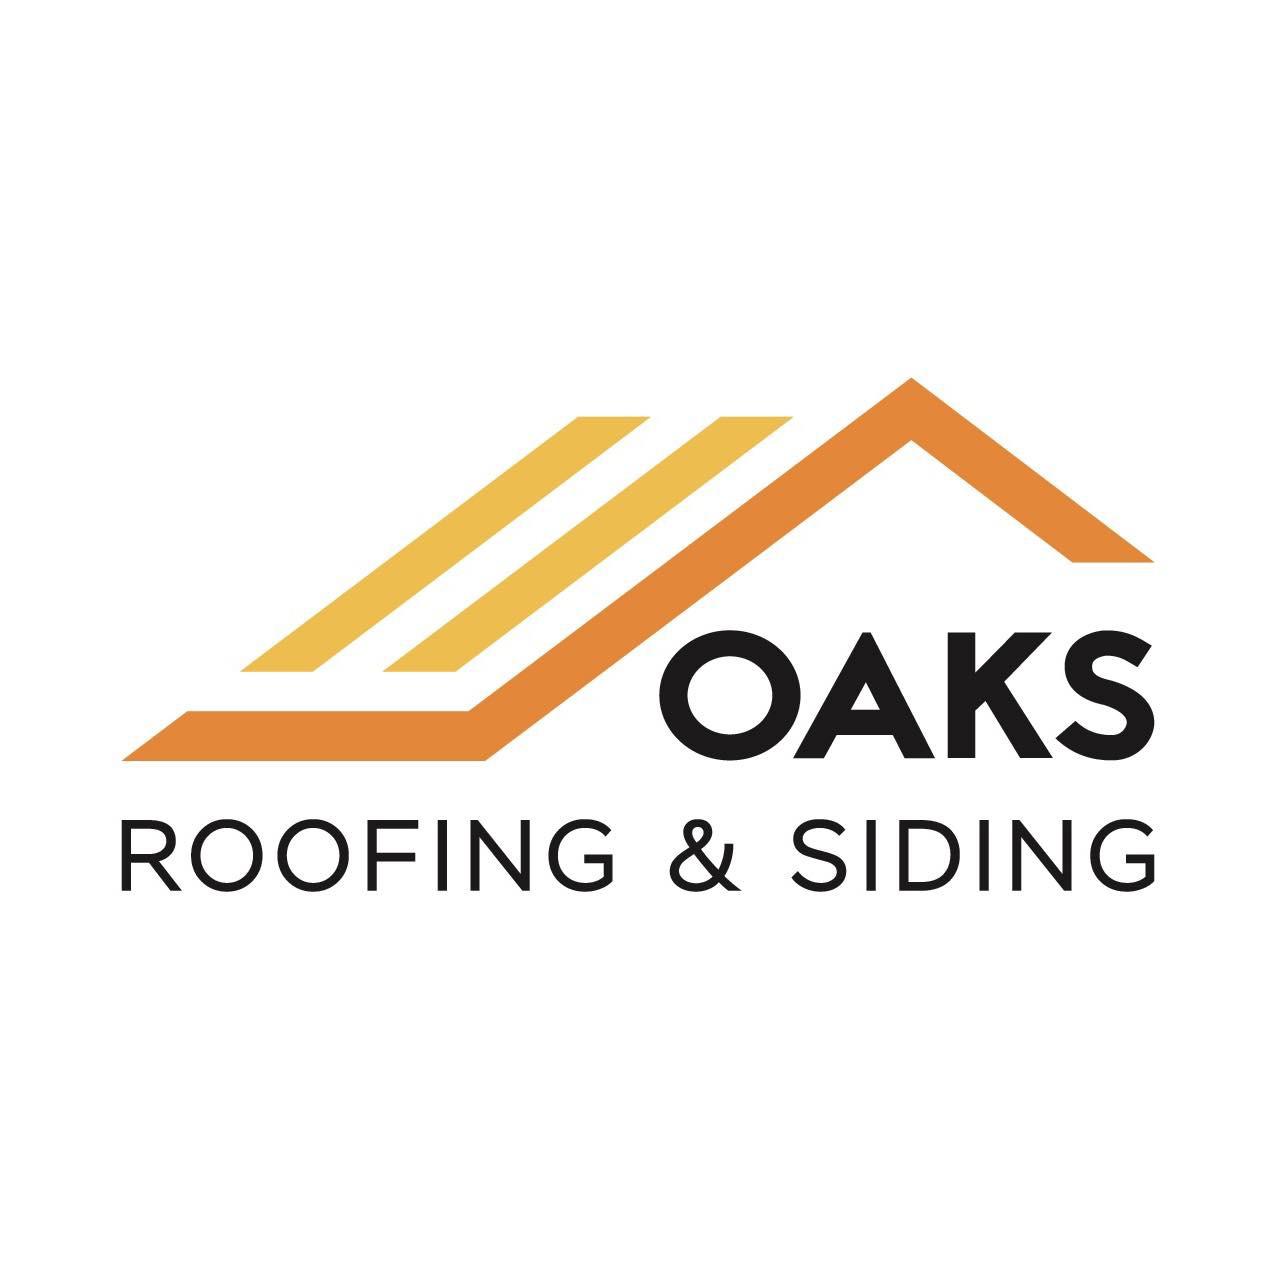 Oaks Roofing and Siding - Webster, NY 14580 - (585)247-6257 | ShowMeLocal.com